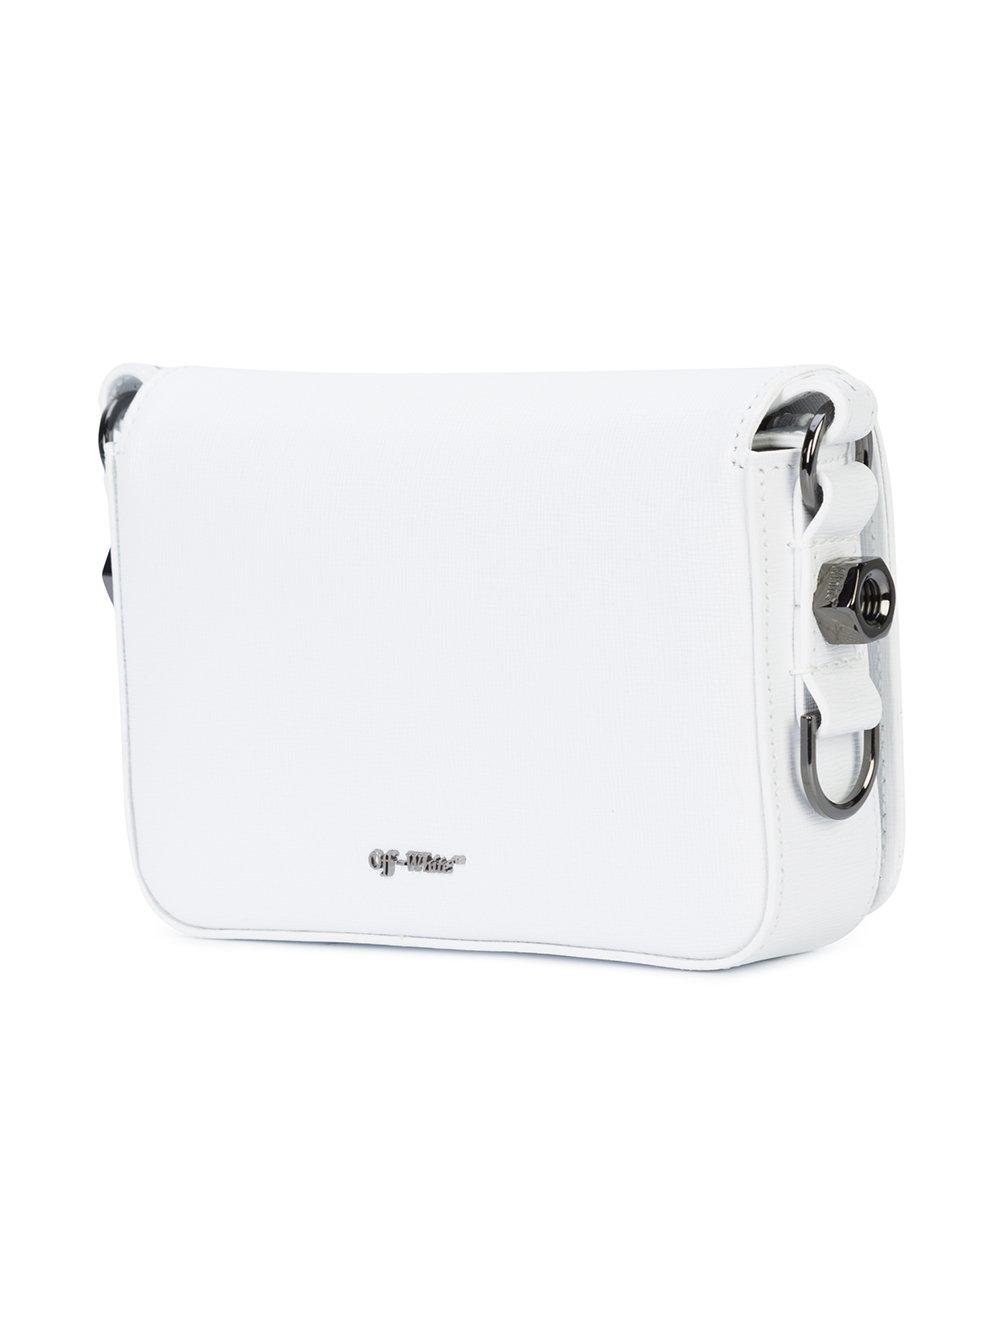 Off-White c/o Virgil Abloh Leather Striped Crossbody Bag in White - Lyst